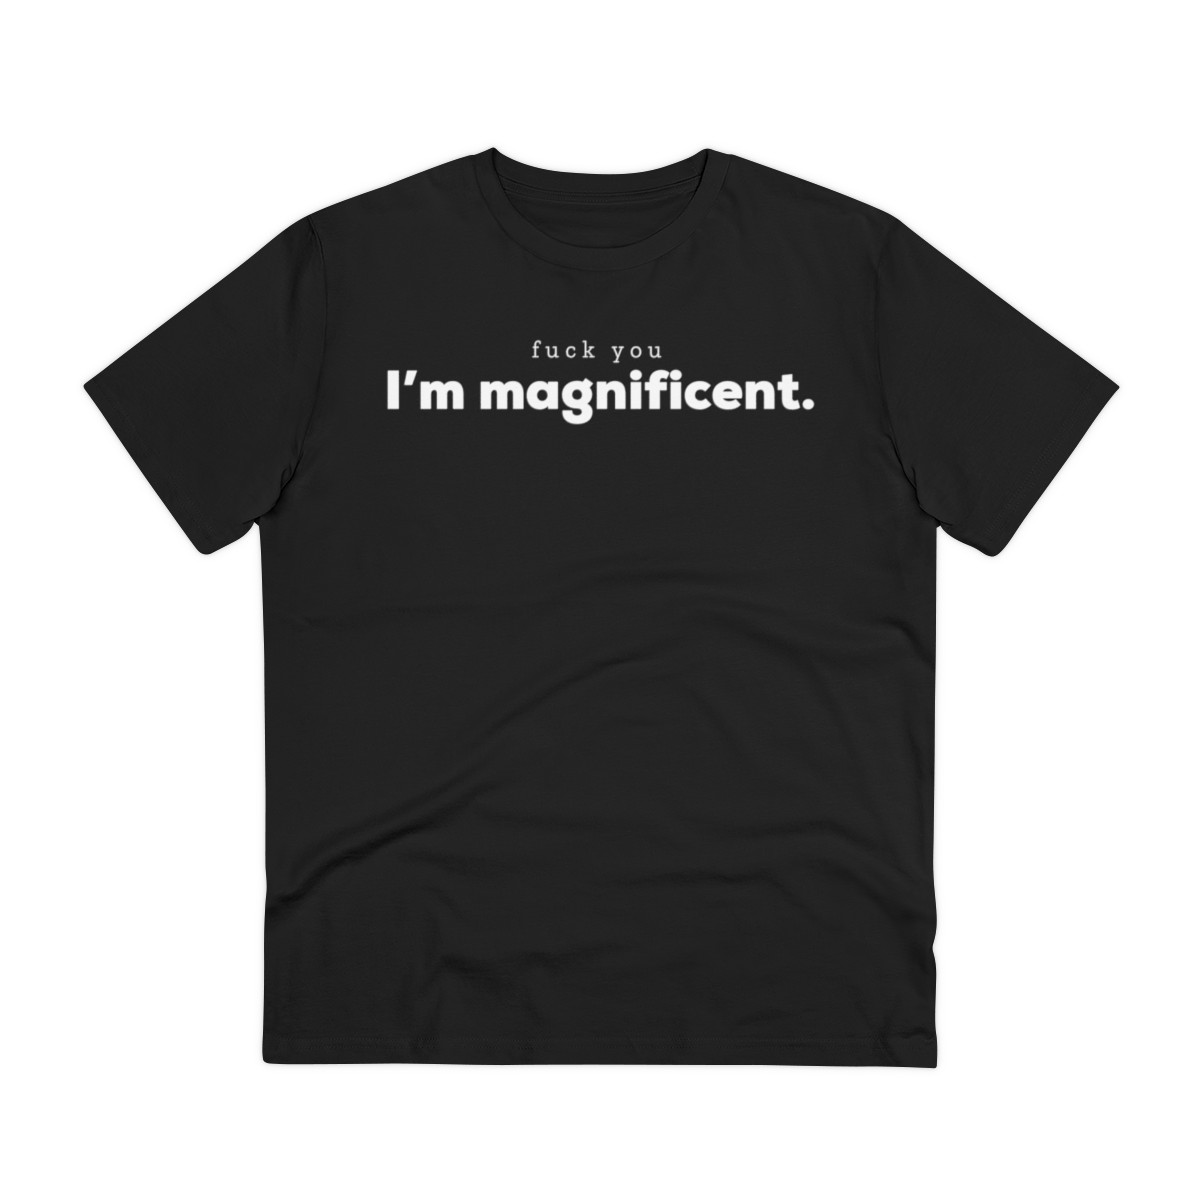 Fuck you / I'm magnificent T-shirt - Unisex product main image